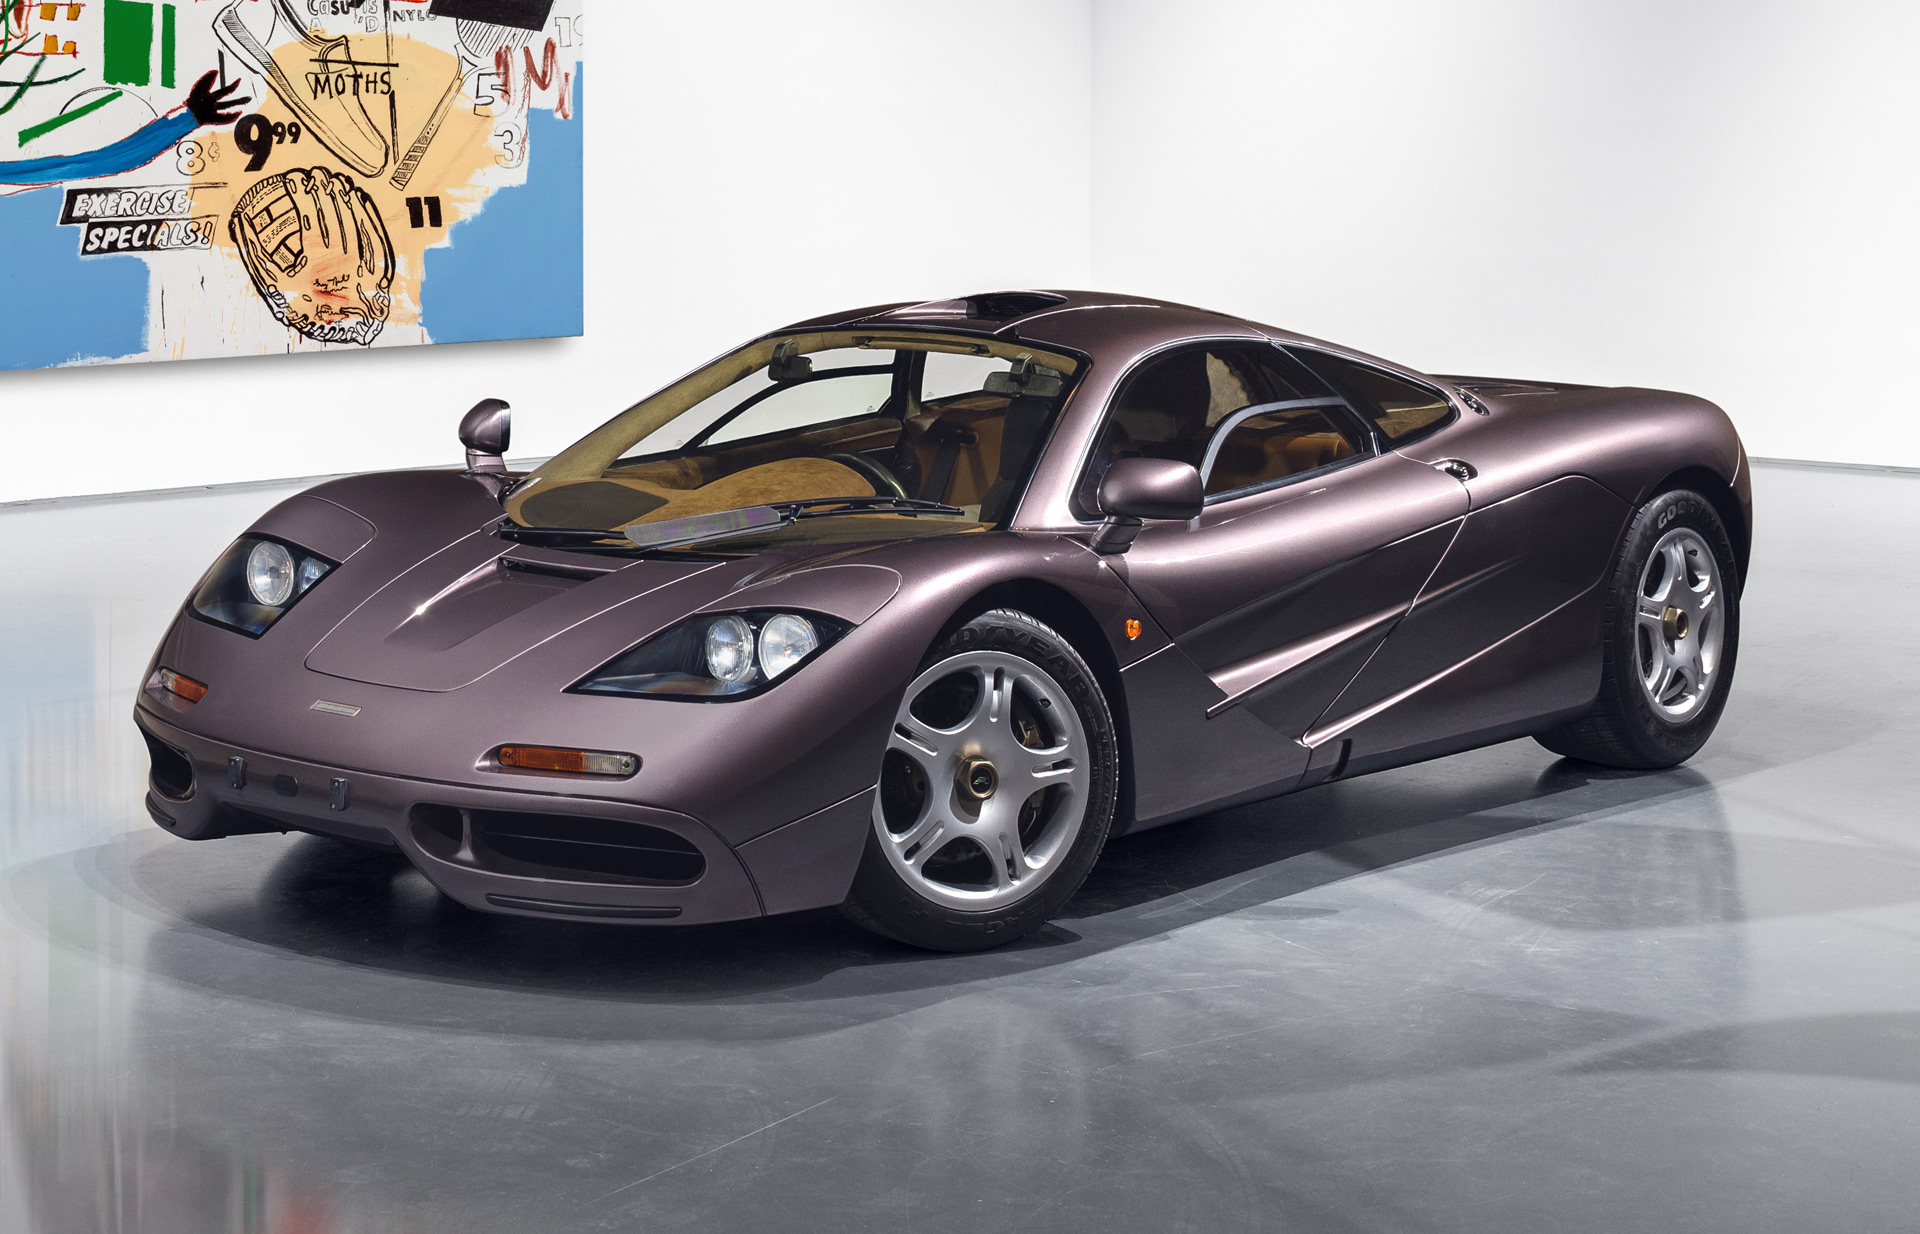 McLaren F1 with just 254 miles on the clock can be yours Auto Recent